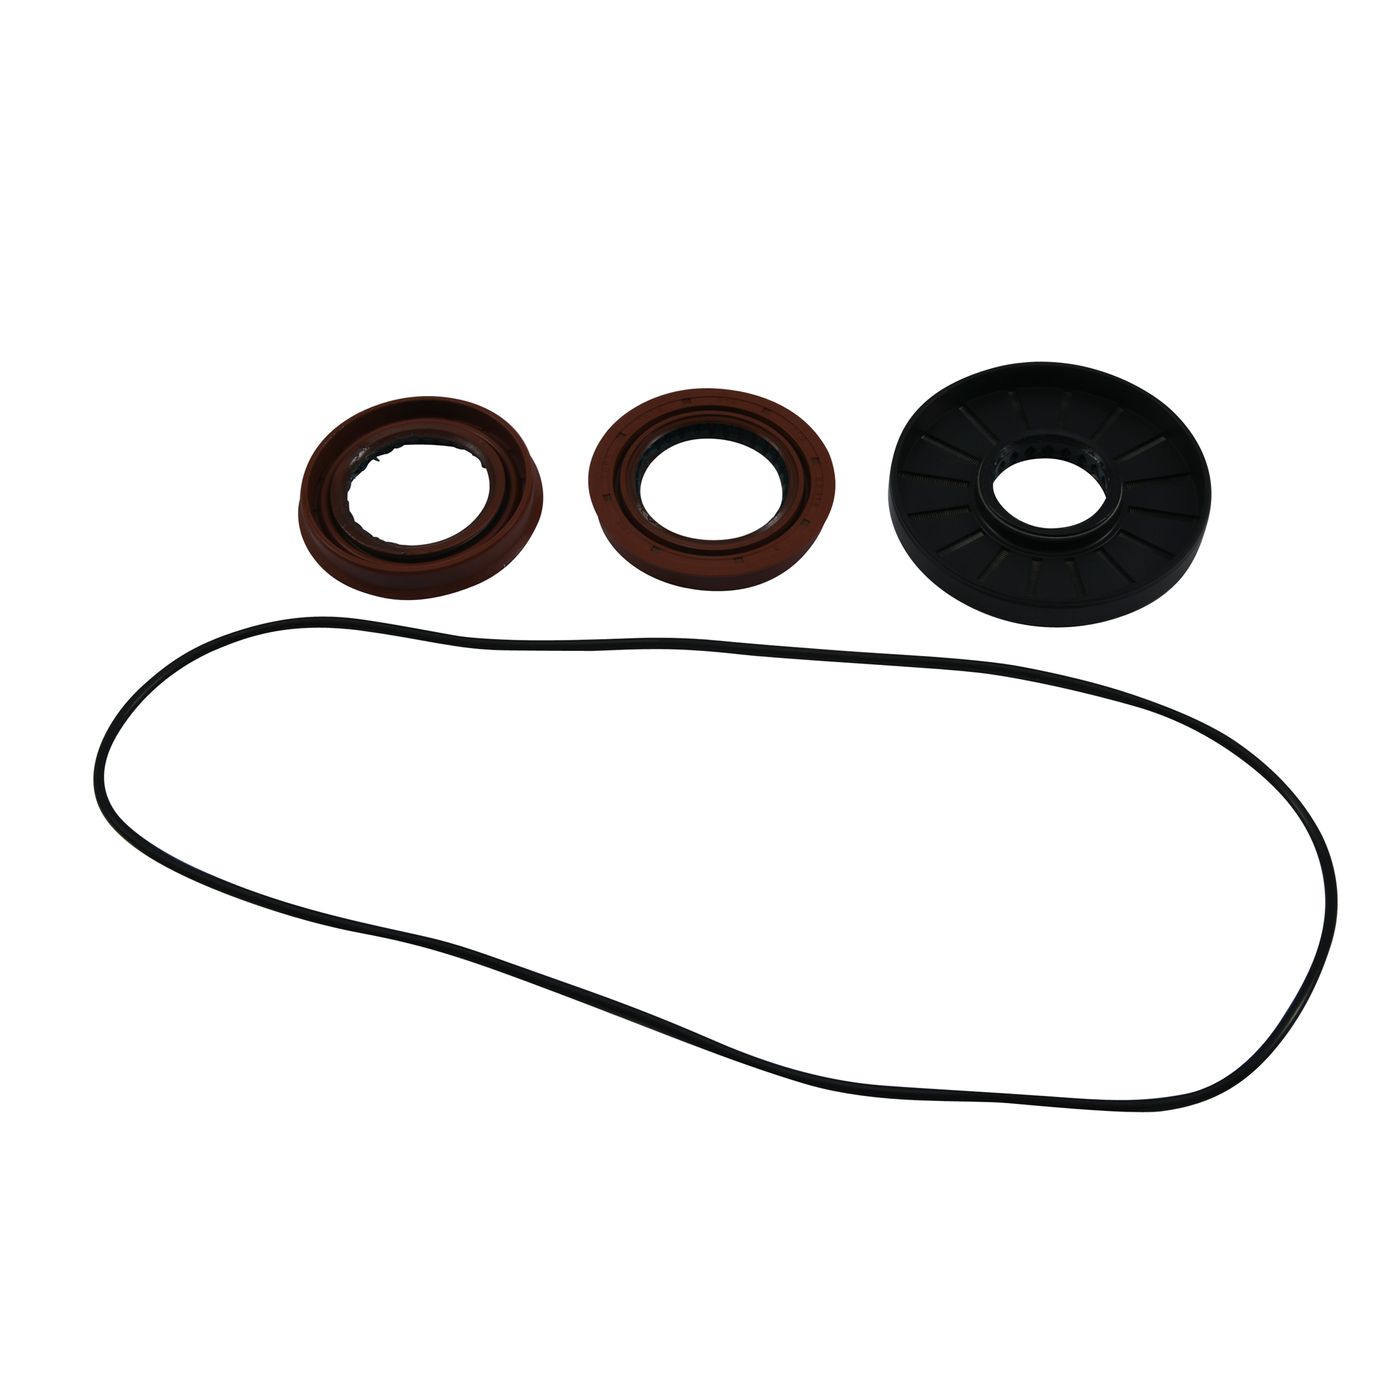 Wrp Diff Seal Kits - WRP252088-5 image